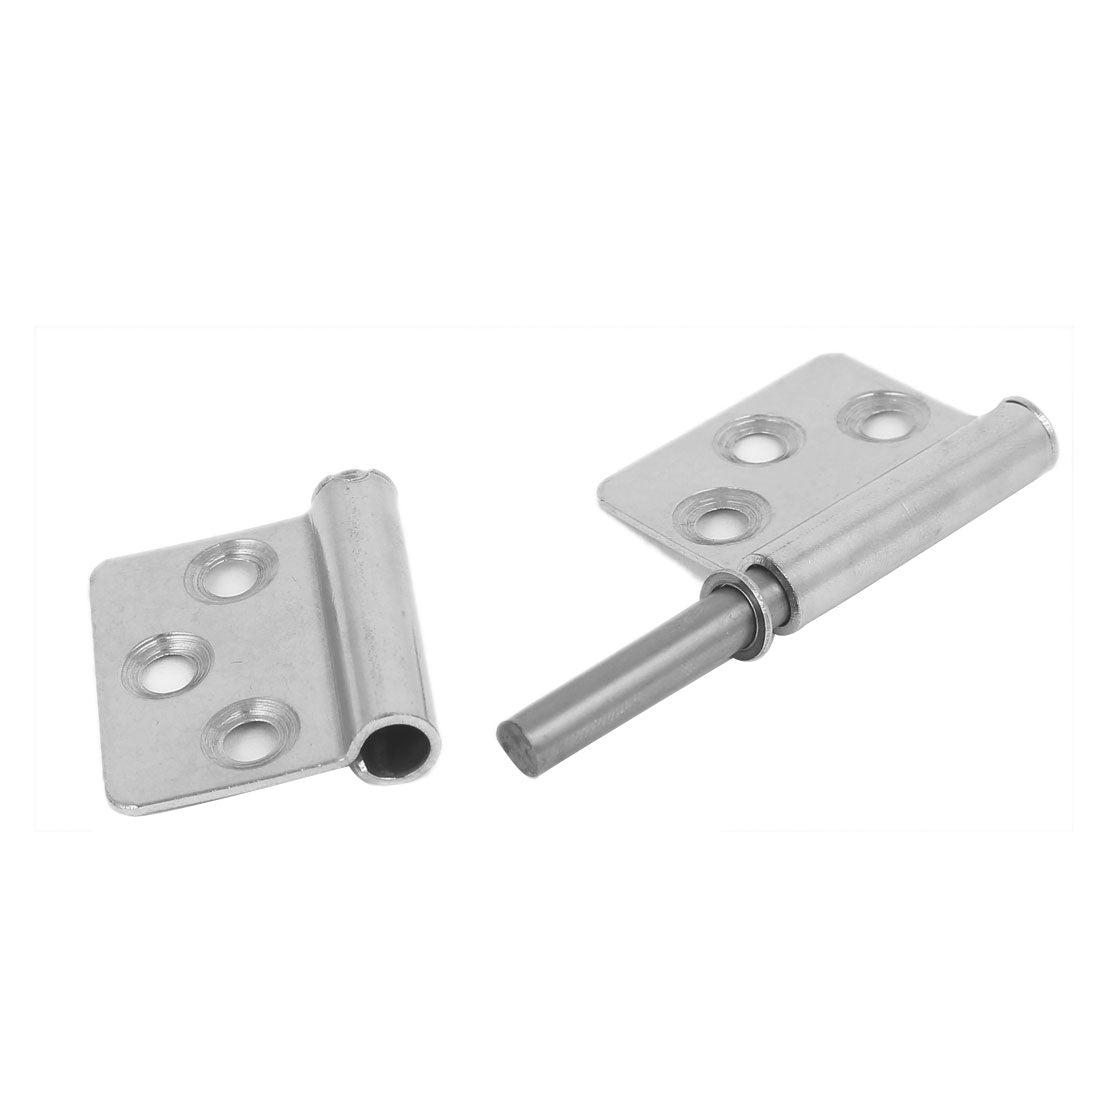 uxcell Uxcell 3-inch Long Stainless Steel Two Leaves Detachable Flag Hinge 4pcs for Window Door